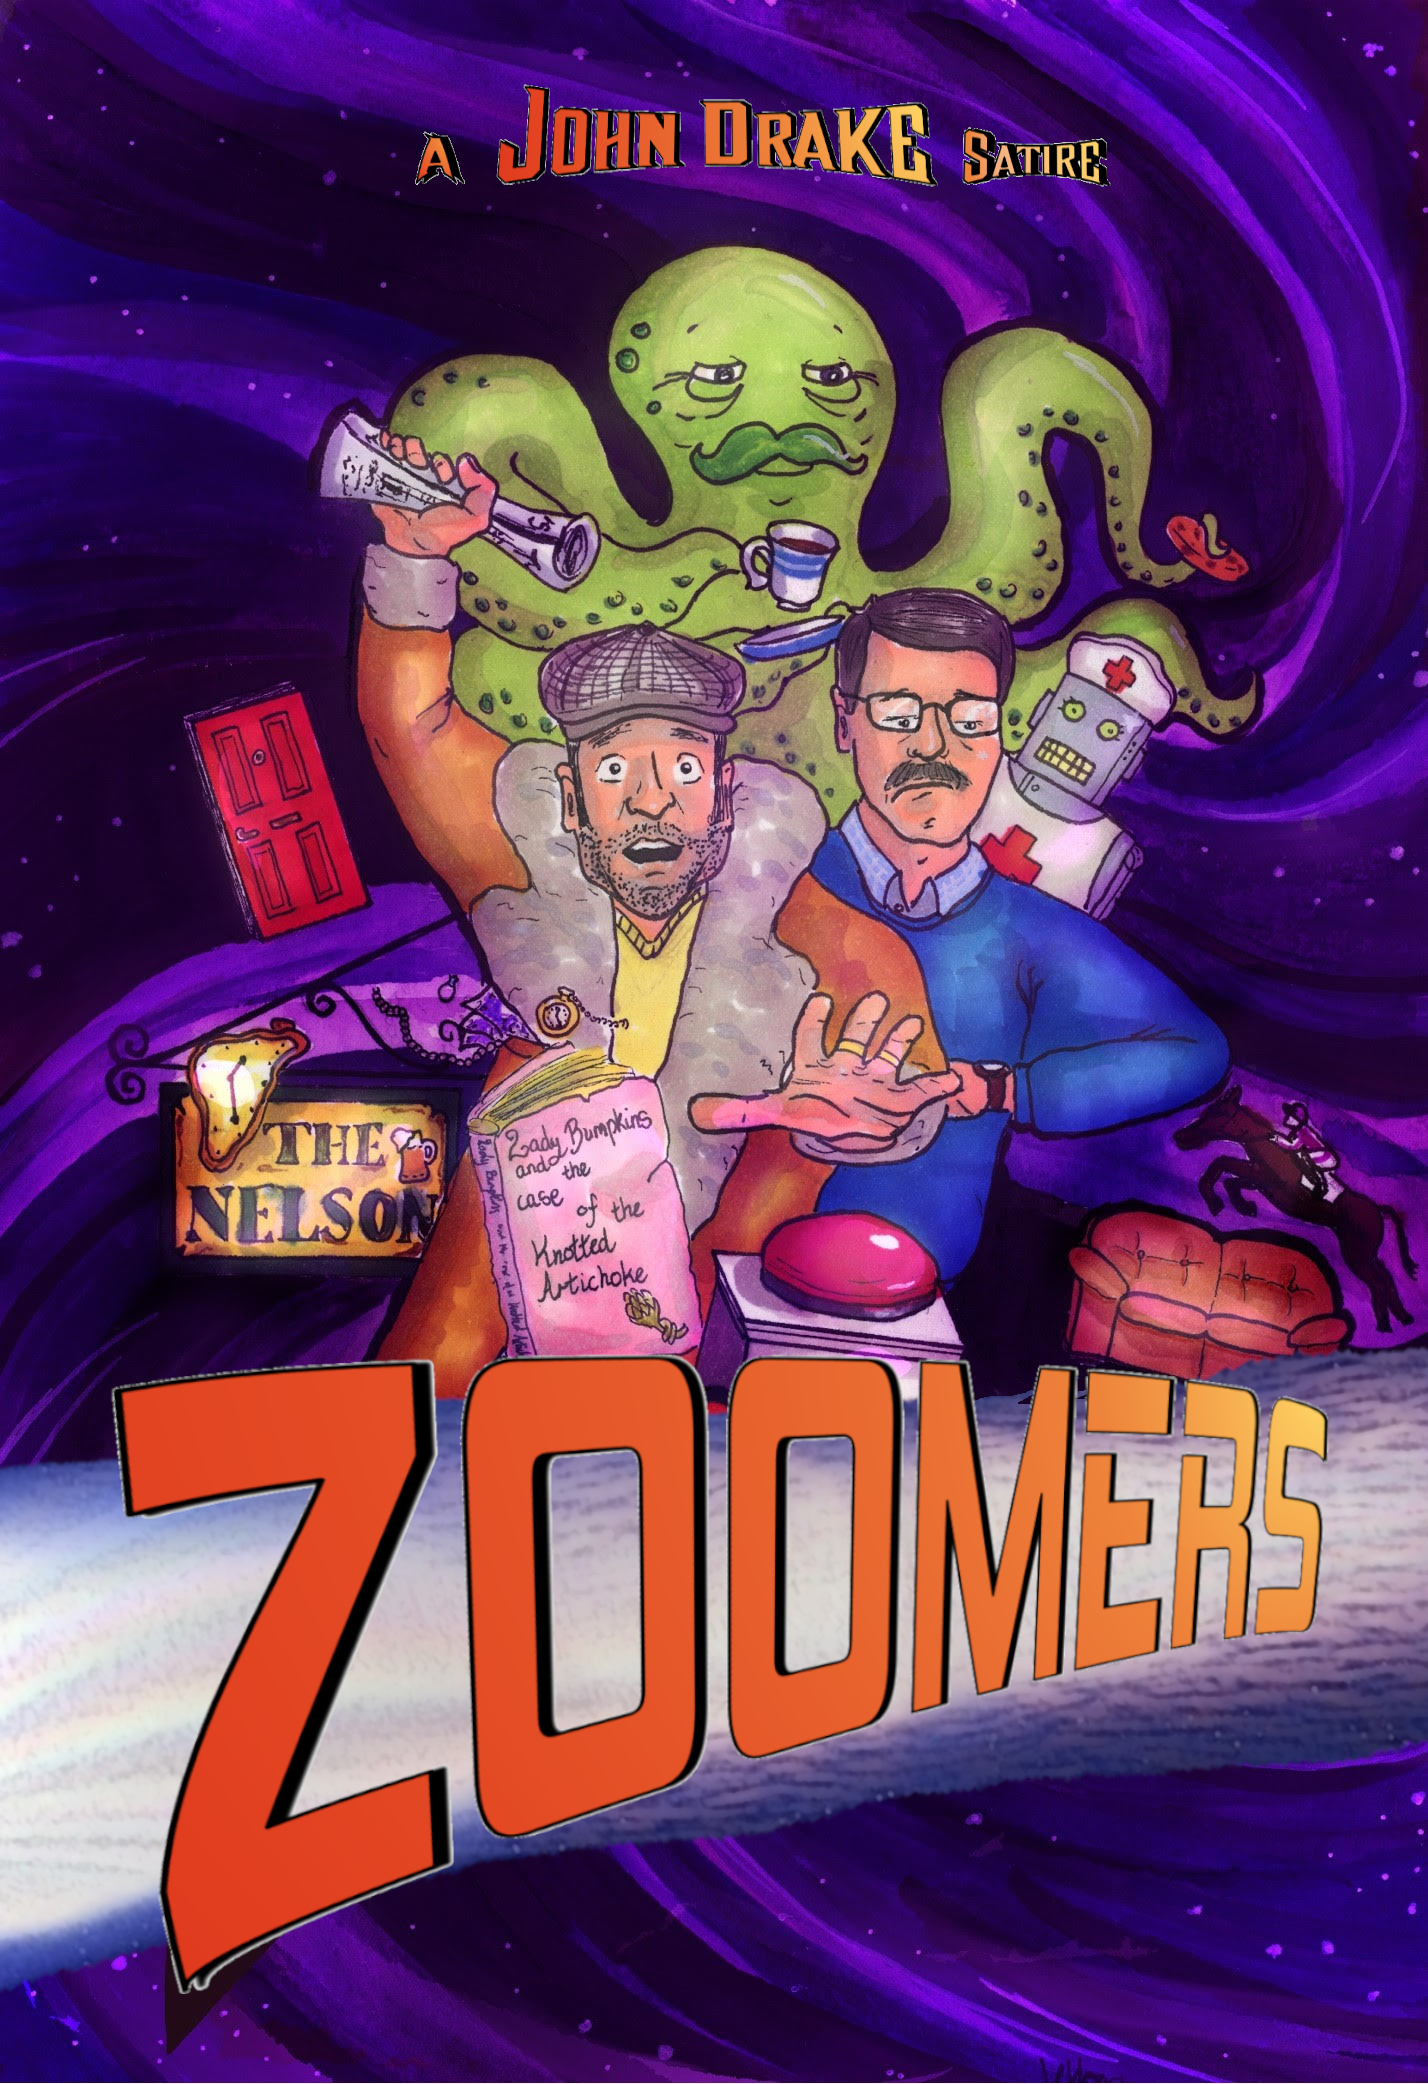 John Drake must be very pleased with himself right about now. I know I would be. His latest creation, Zoomers, has a book birthday today and is now available in Ebook through Amazon!